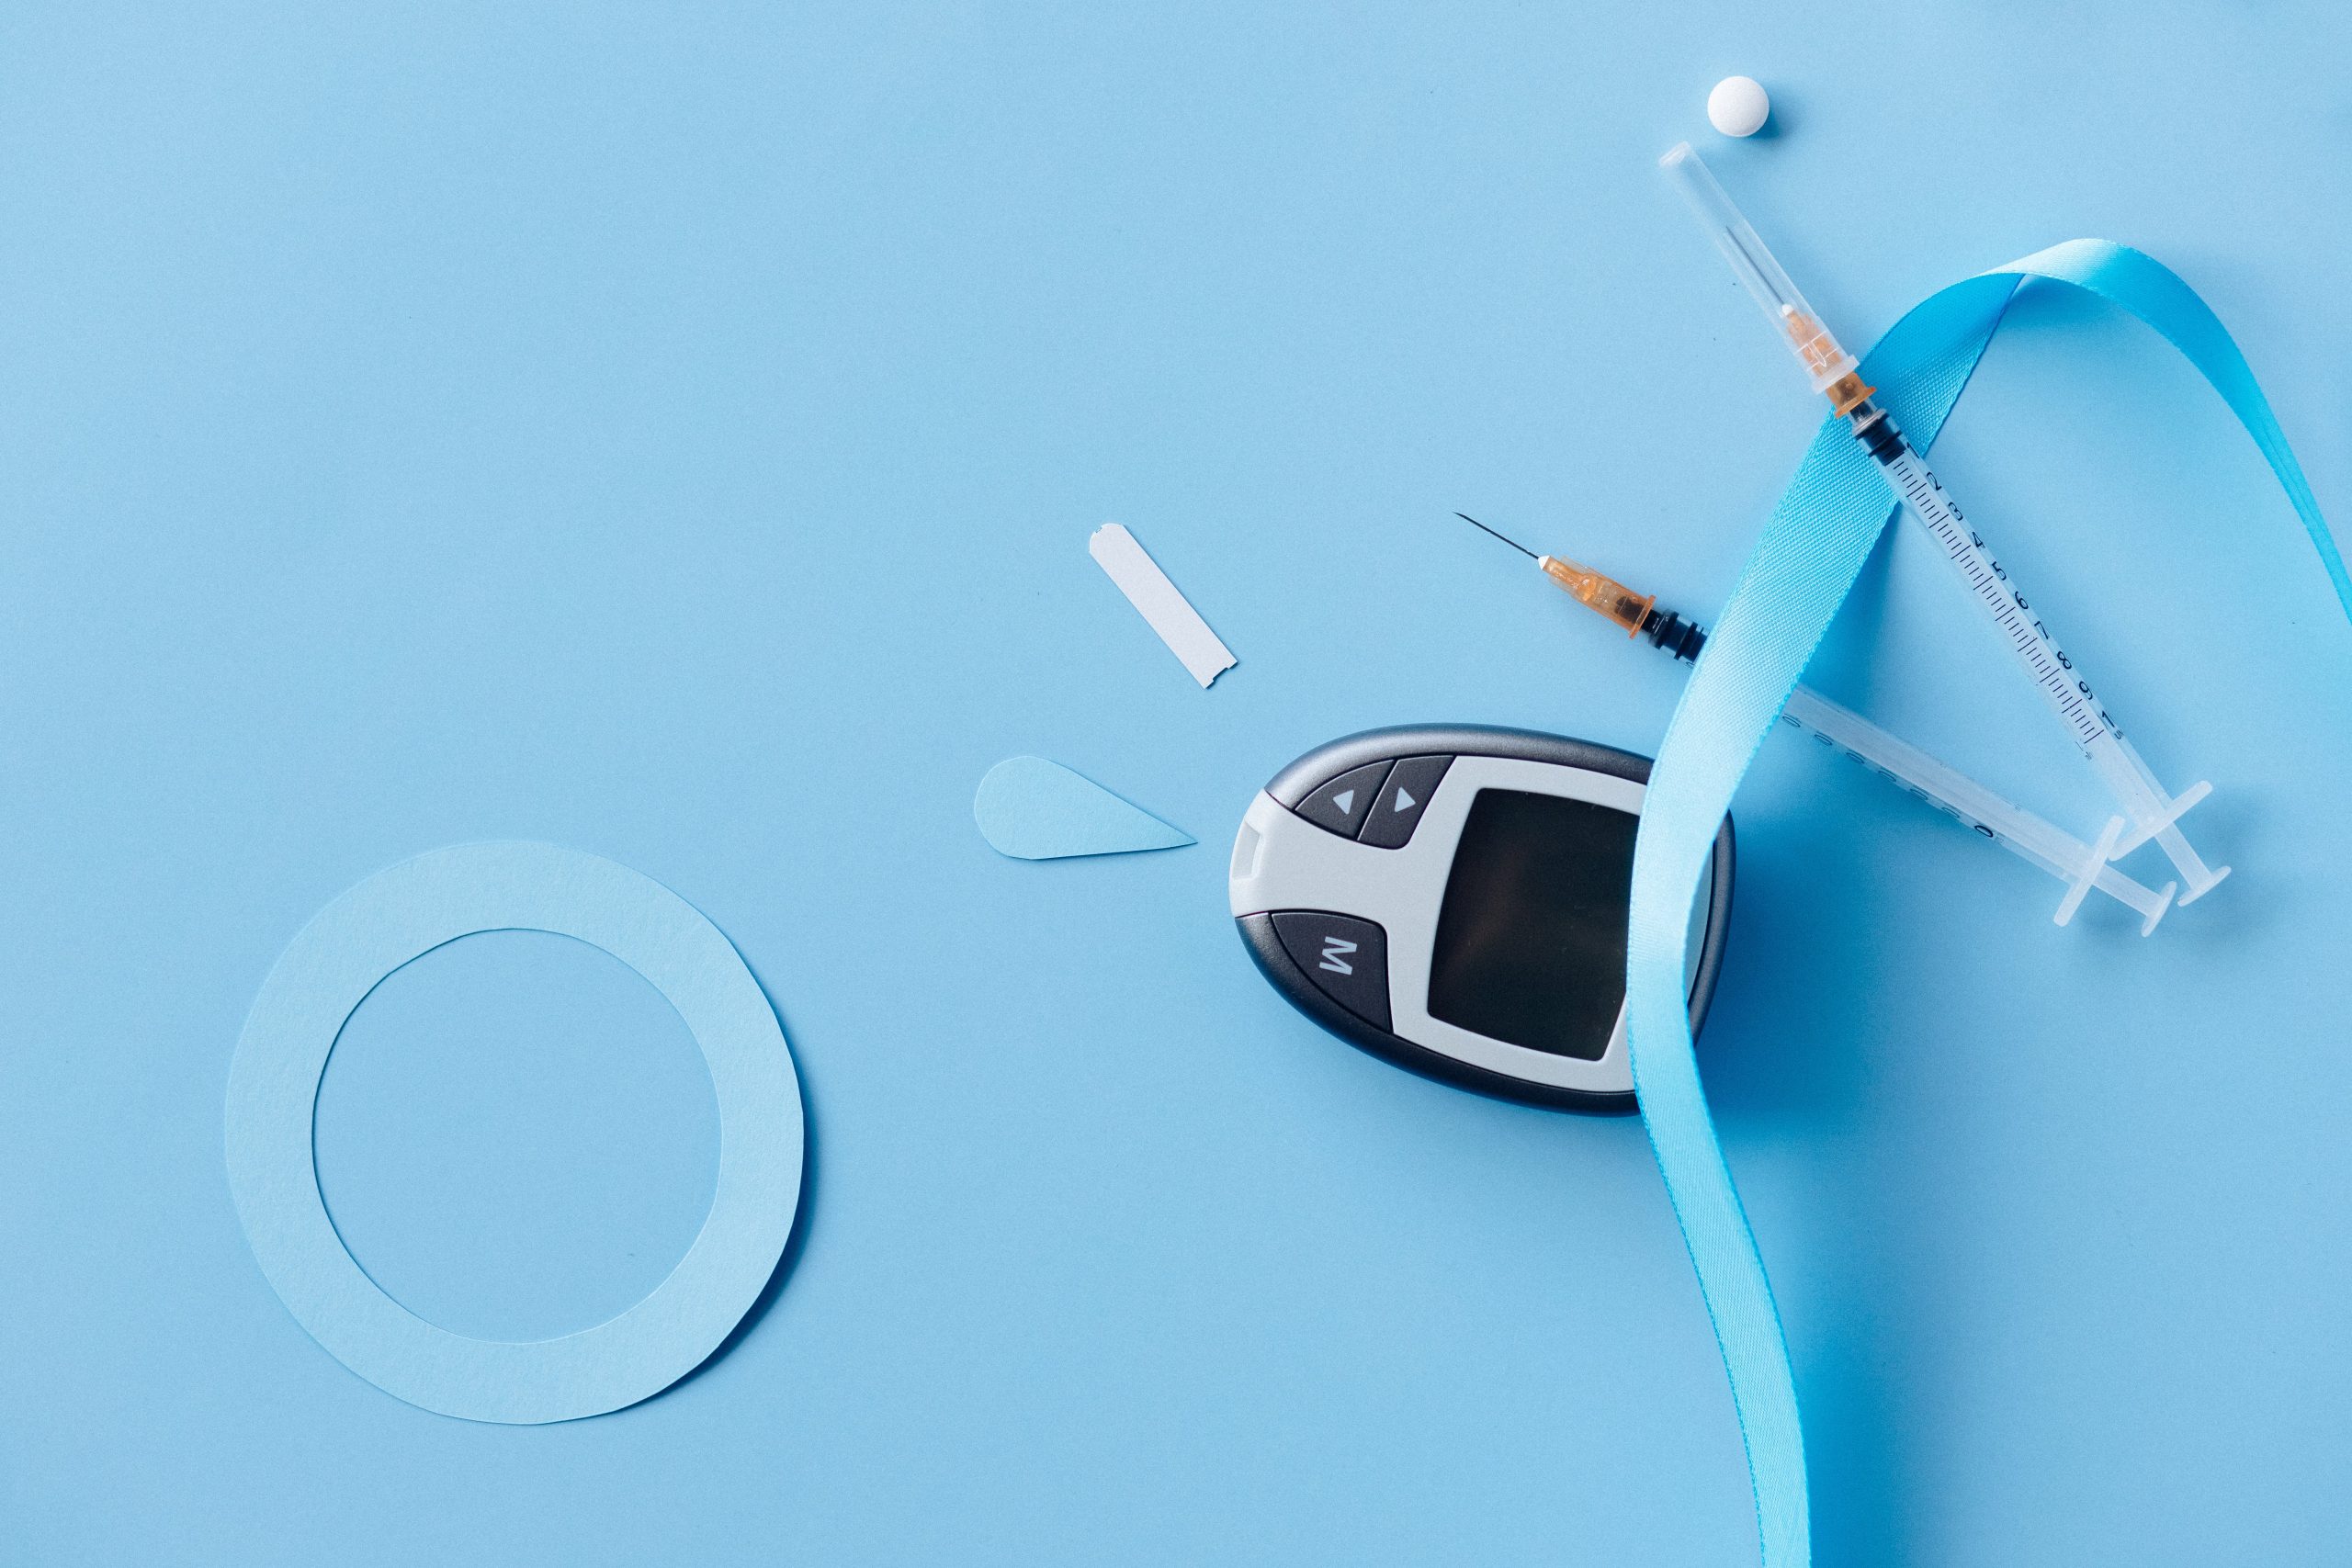 Type 2 Diabetes Drug Achieves Blood Sugar and Weight Loss Targets Faster